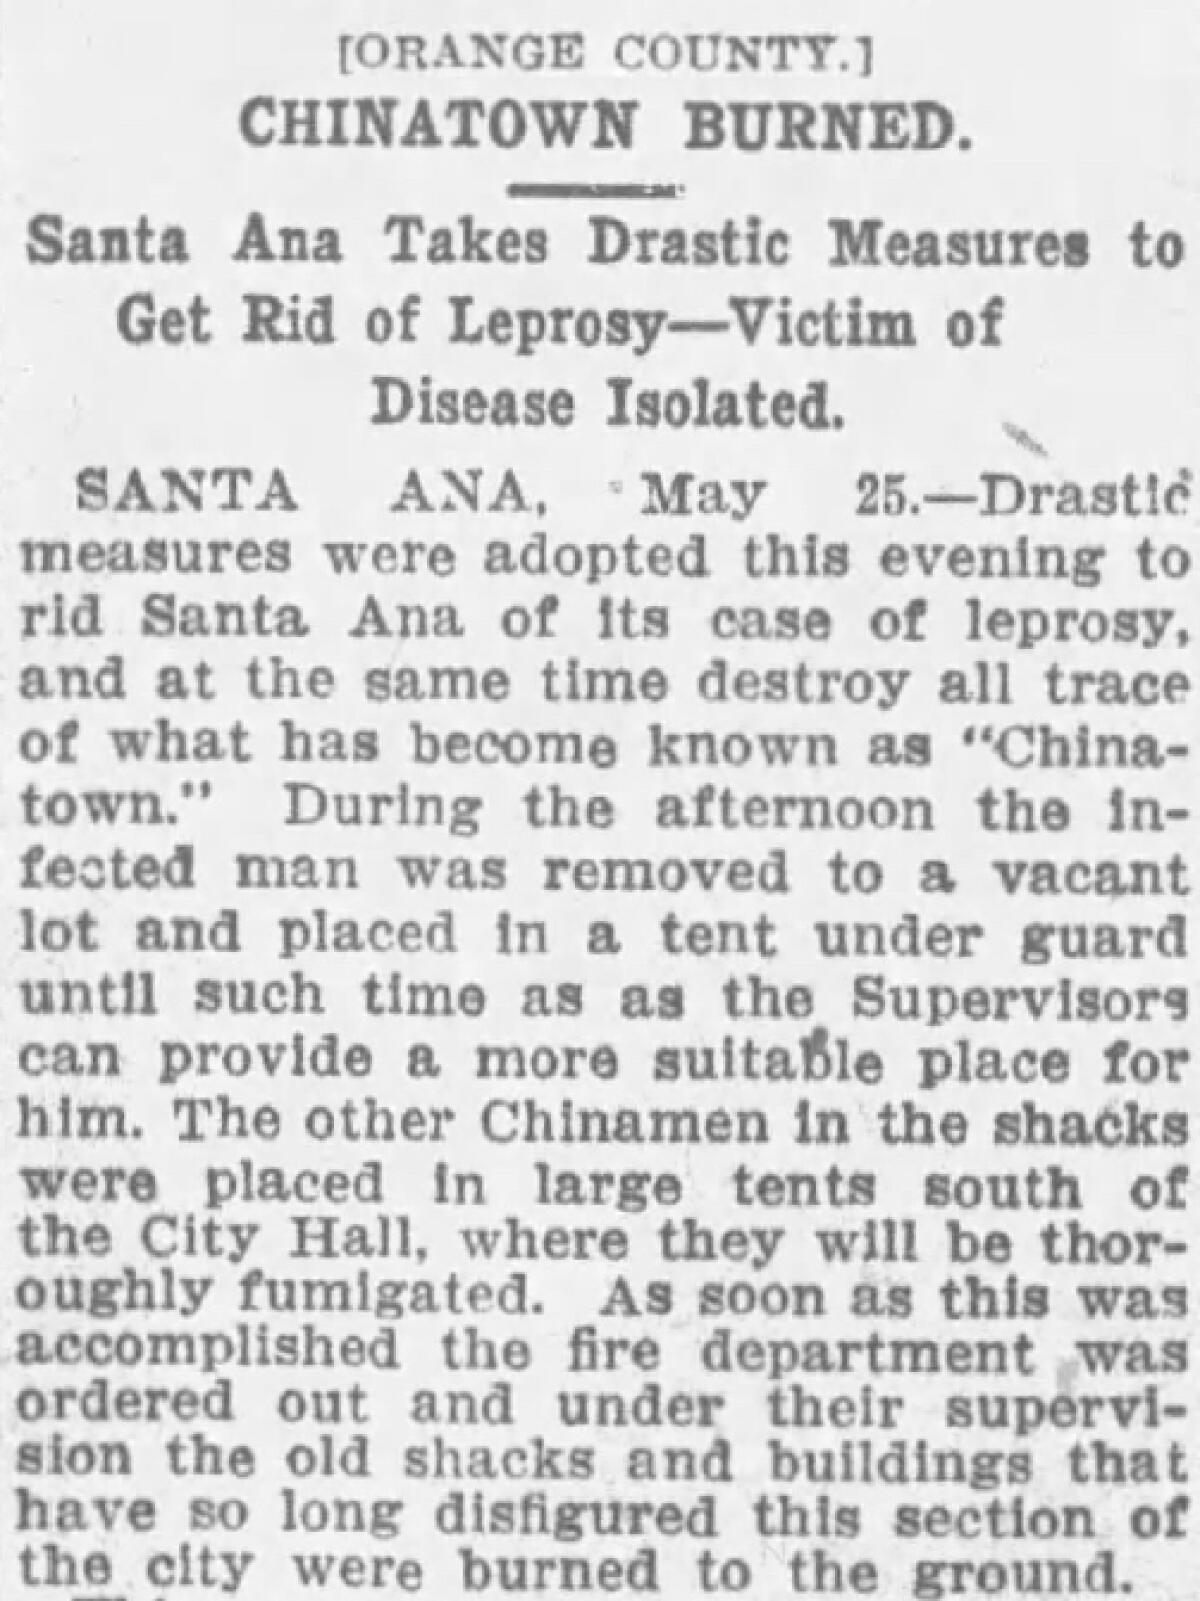 A newspaper clipping with the headline Chinatown Burned: Santa Ana takes drastic measures to get rid of leprosy